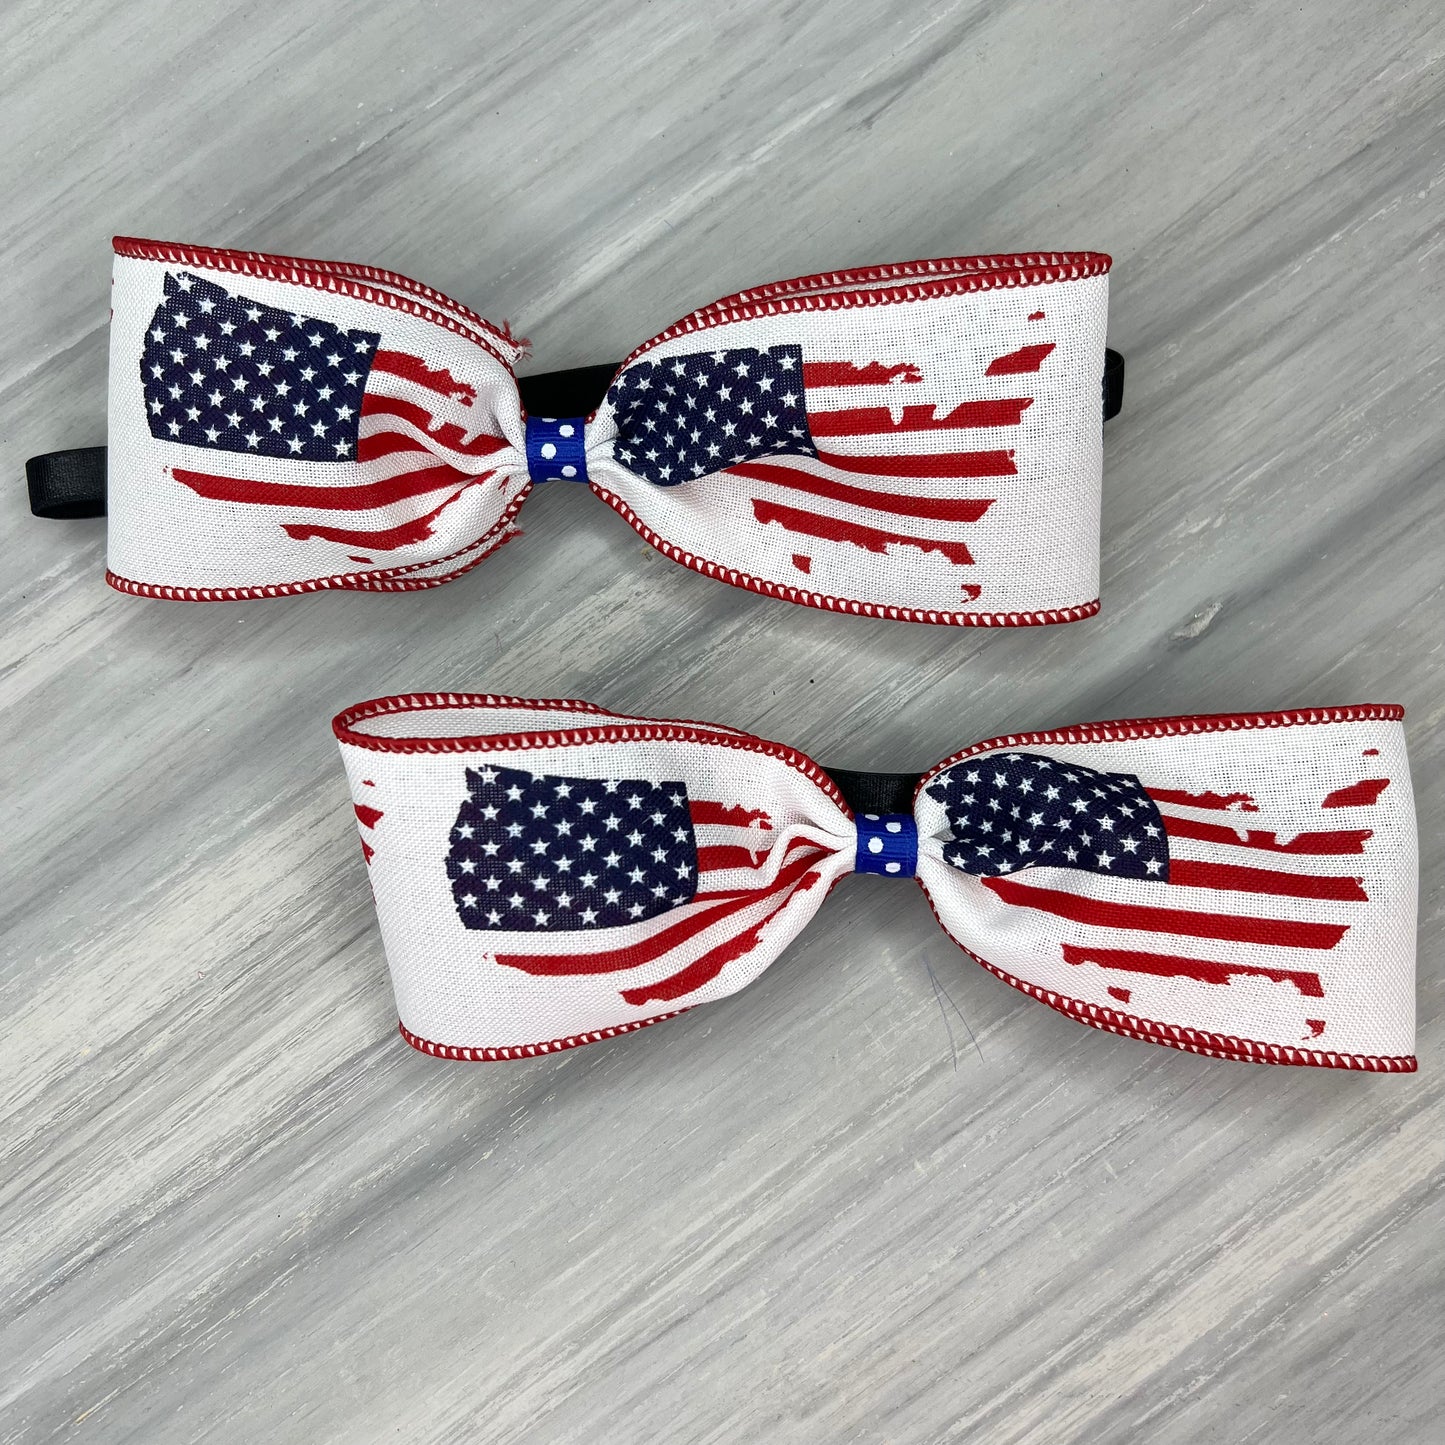 USA - XL Bow Tie - 2 Extra Large Neckties